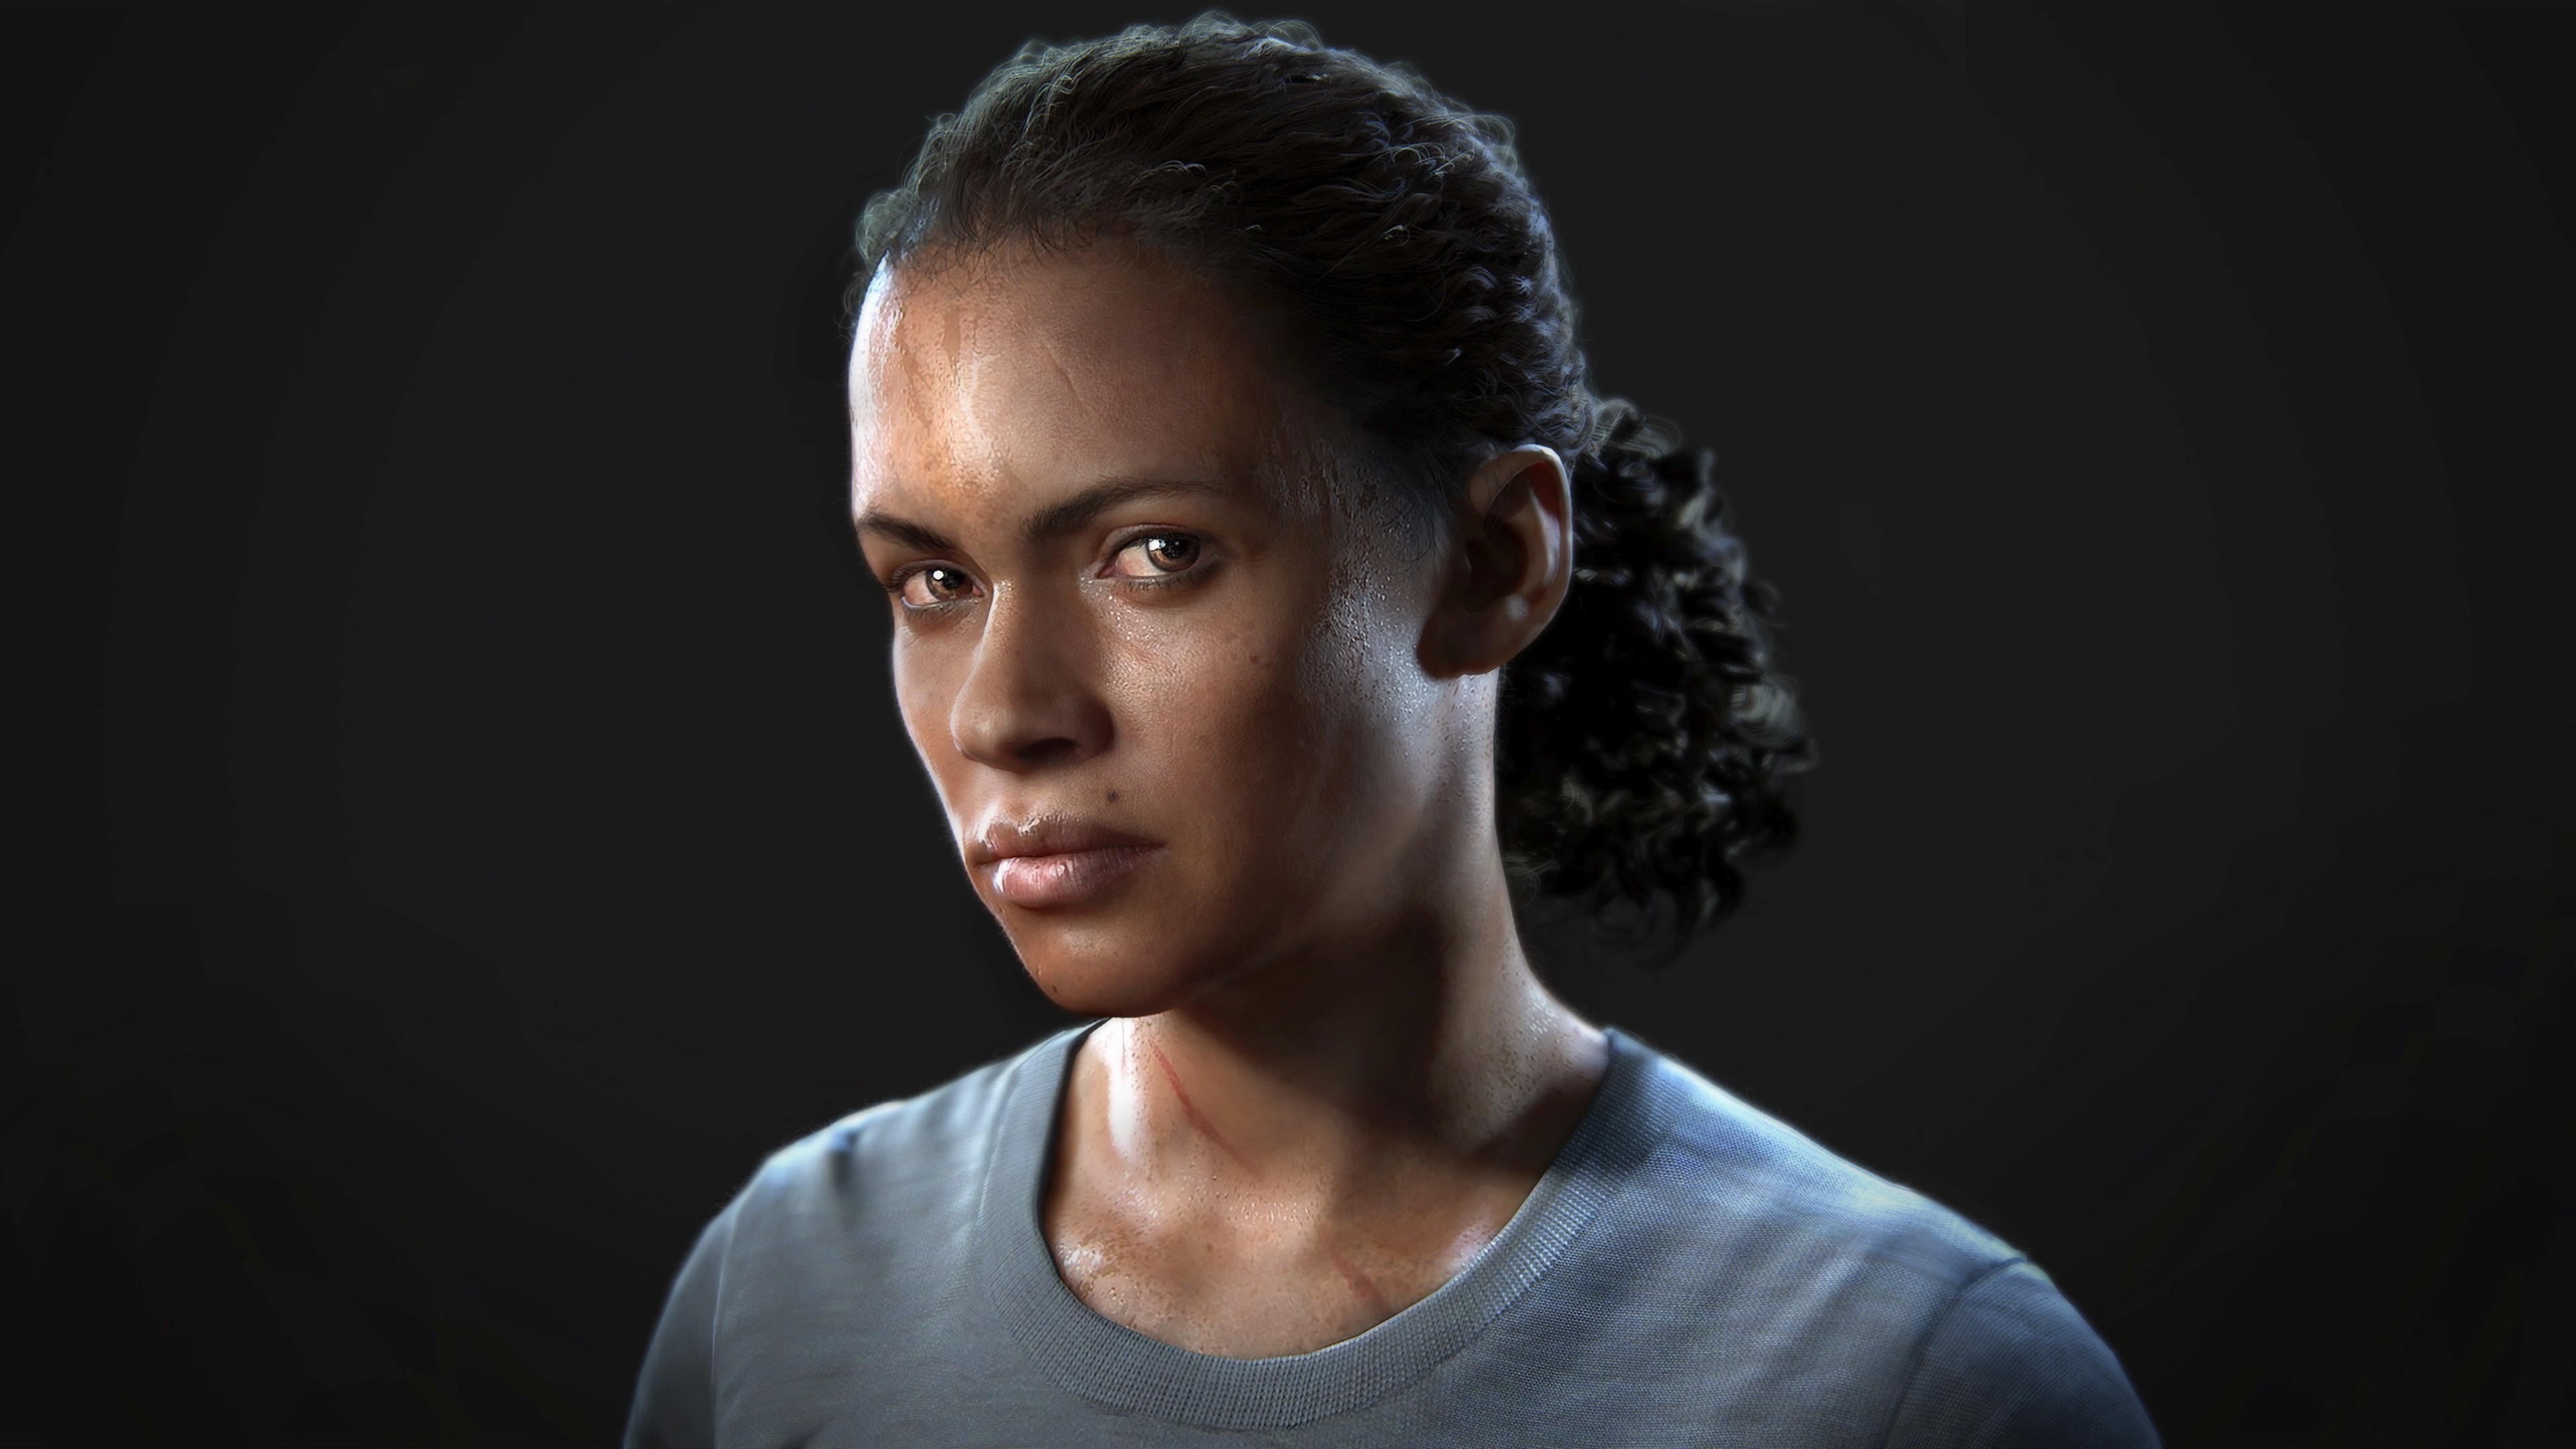 nadine_ross_uncharted_the_lost_legacy-3840x2160.jpg